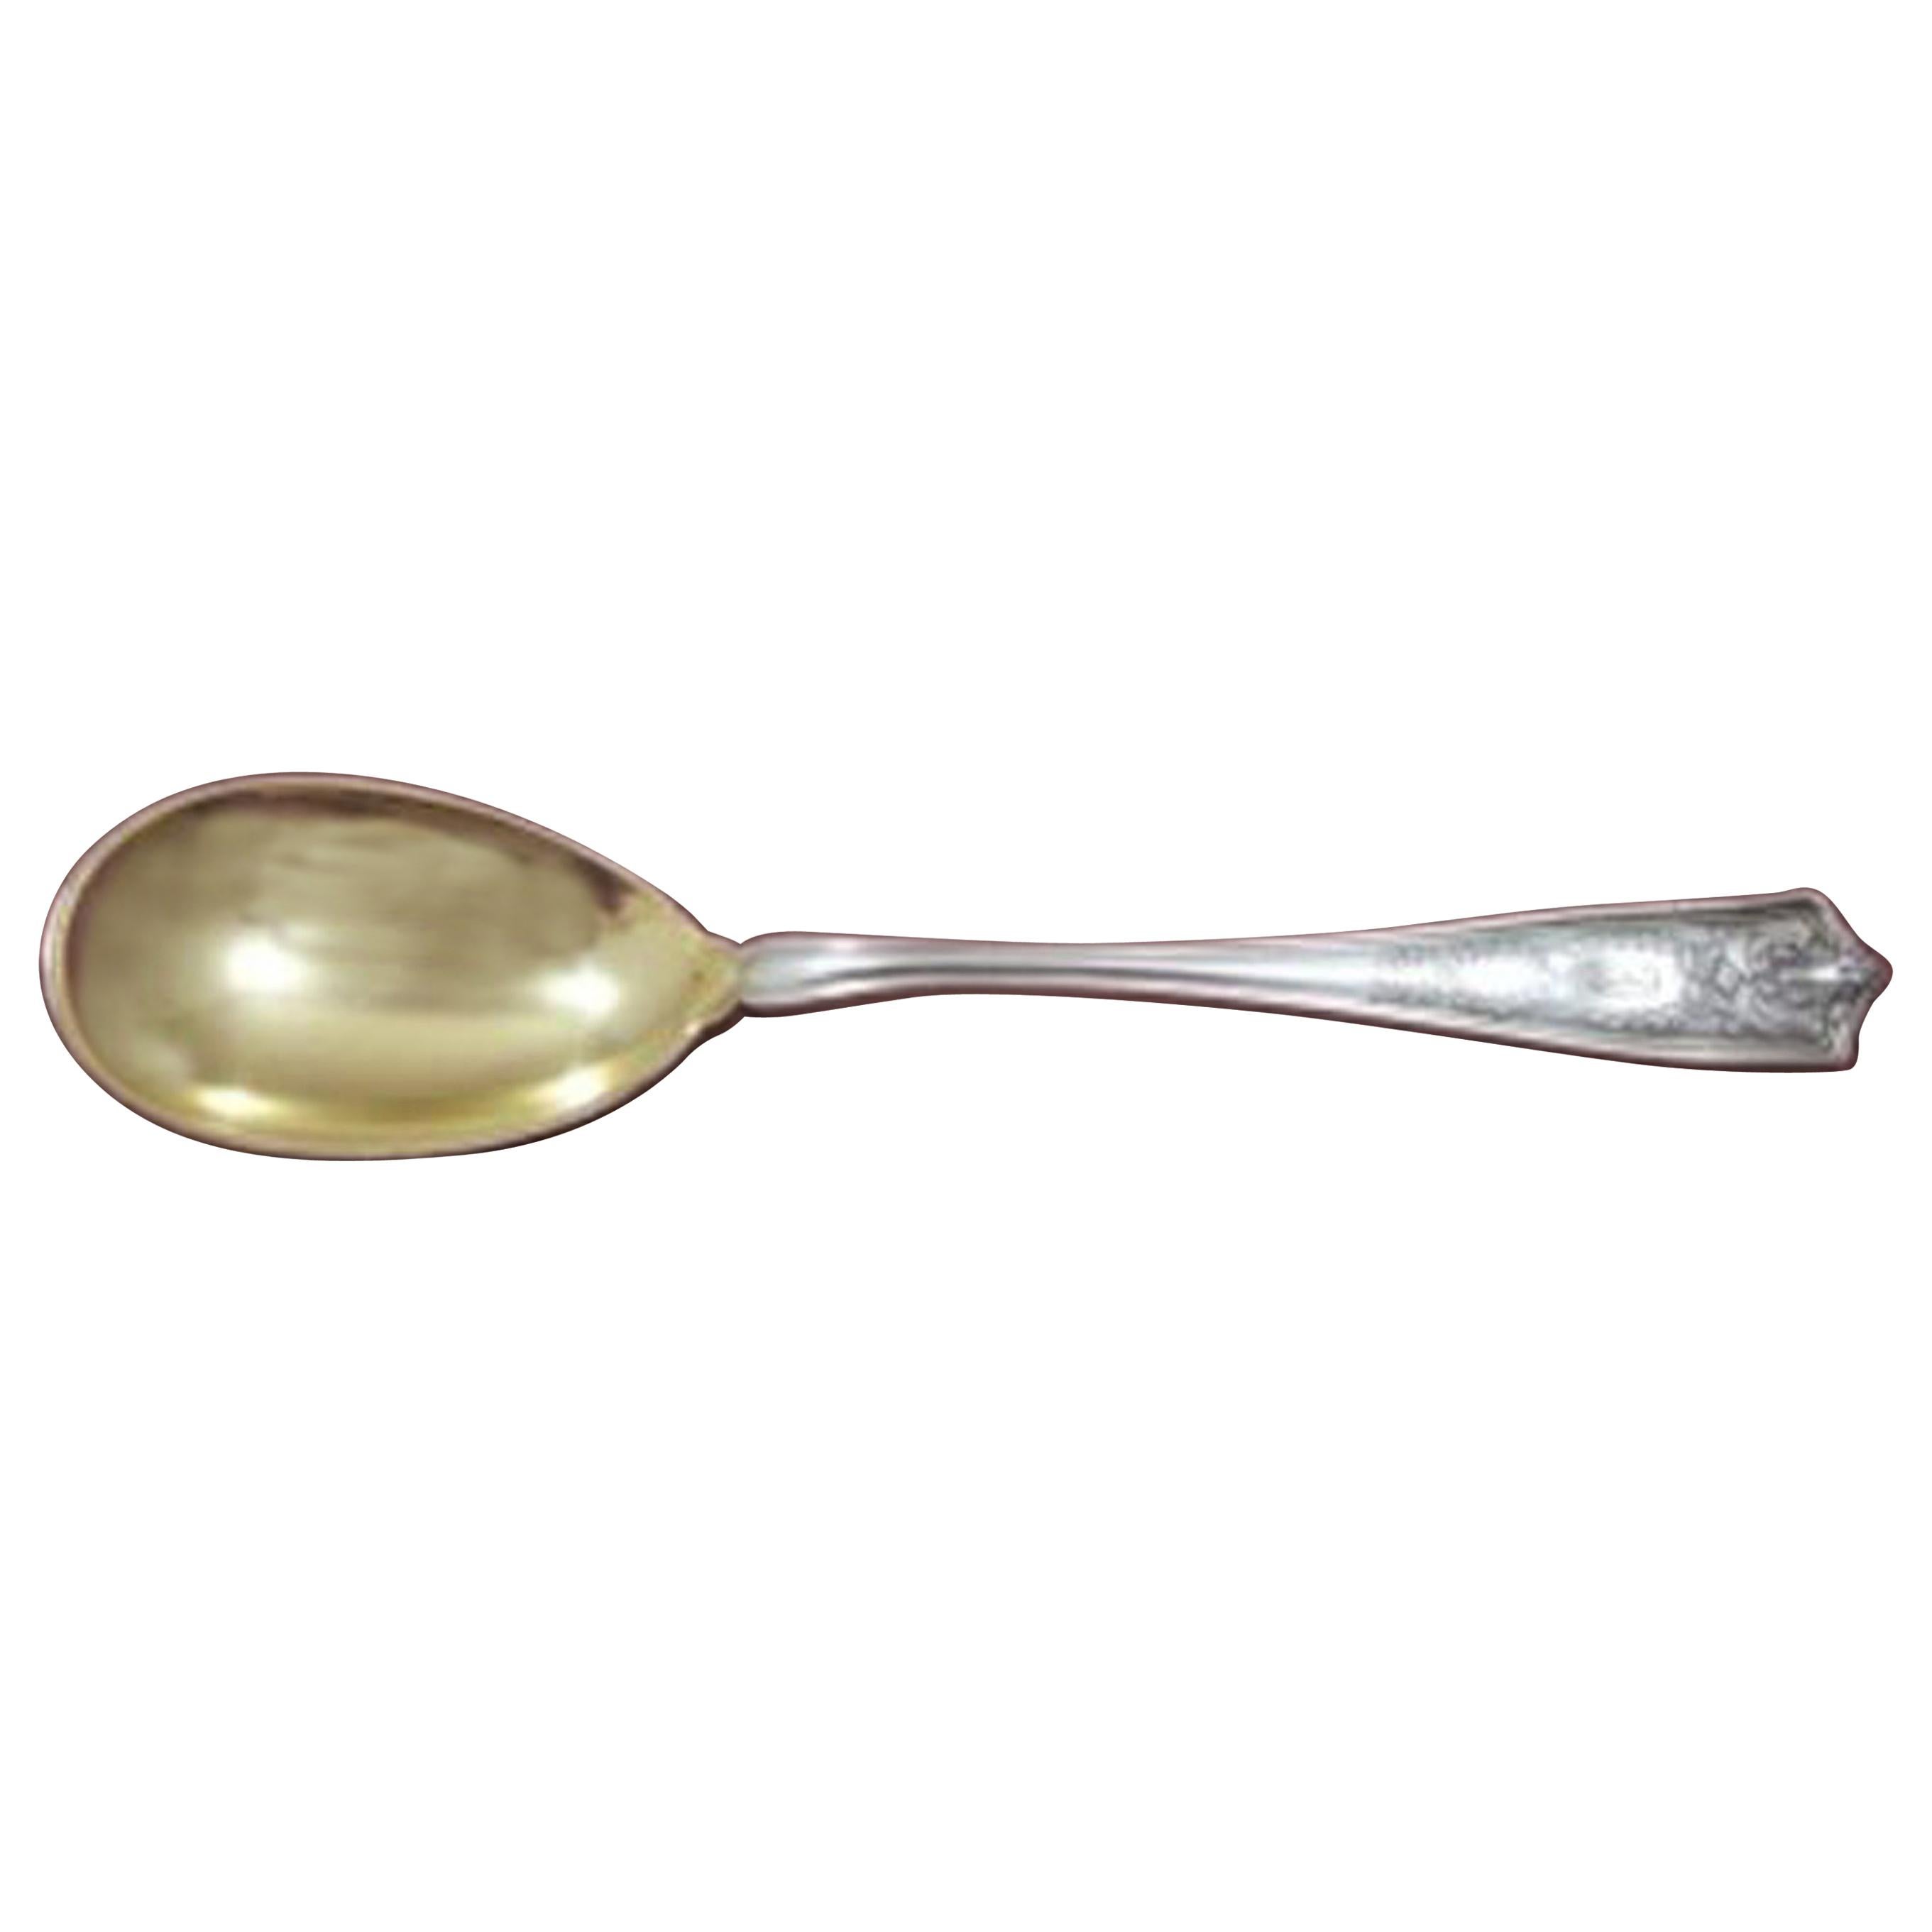 Winthrop by Tiffany & Co. Sterling Silver Egg Spoon Gold Washed